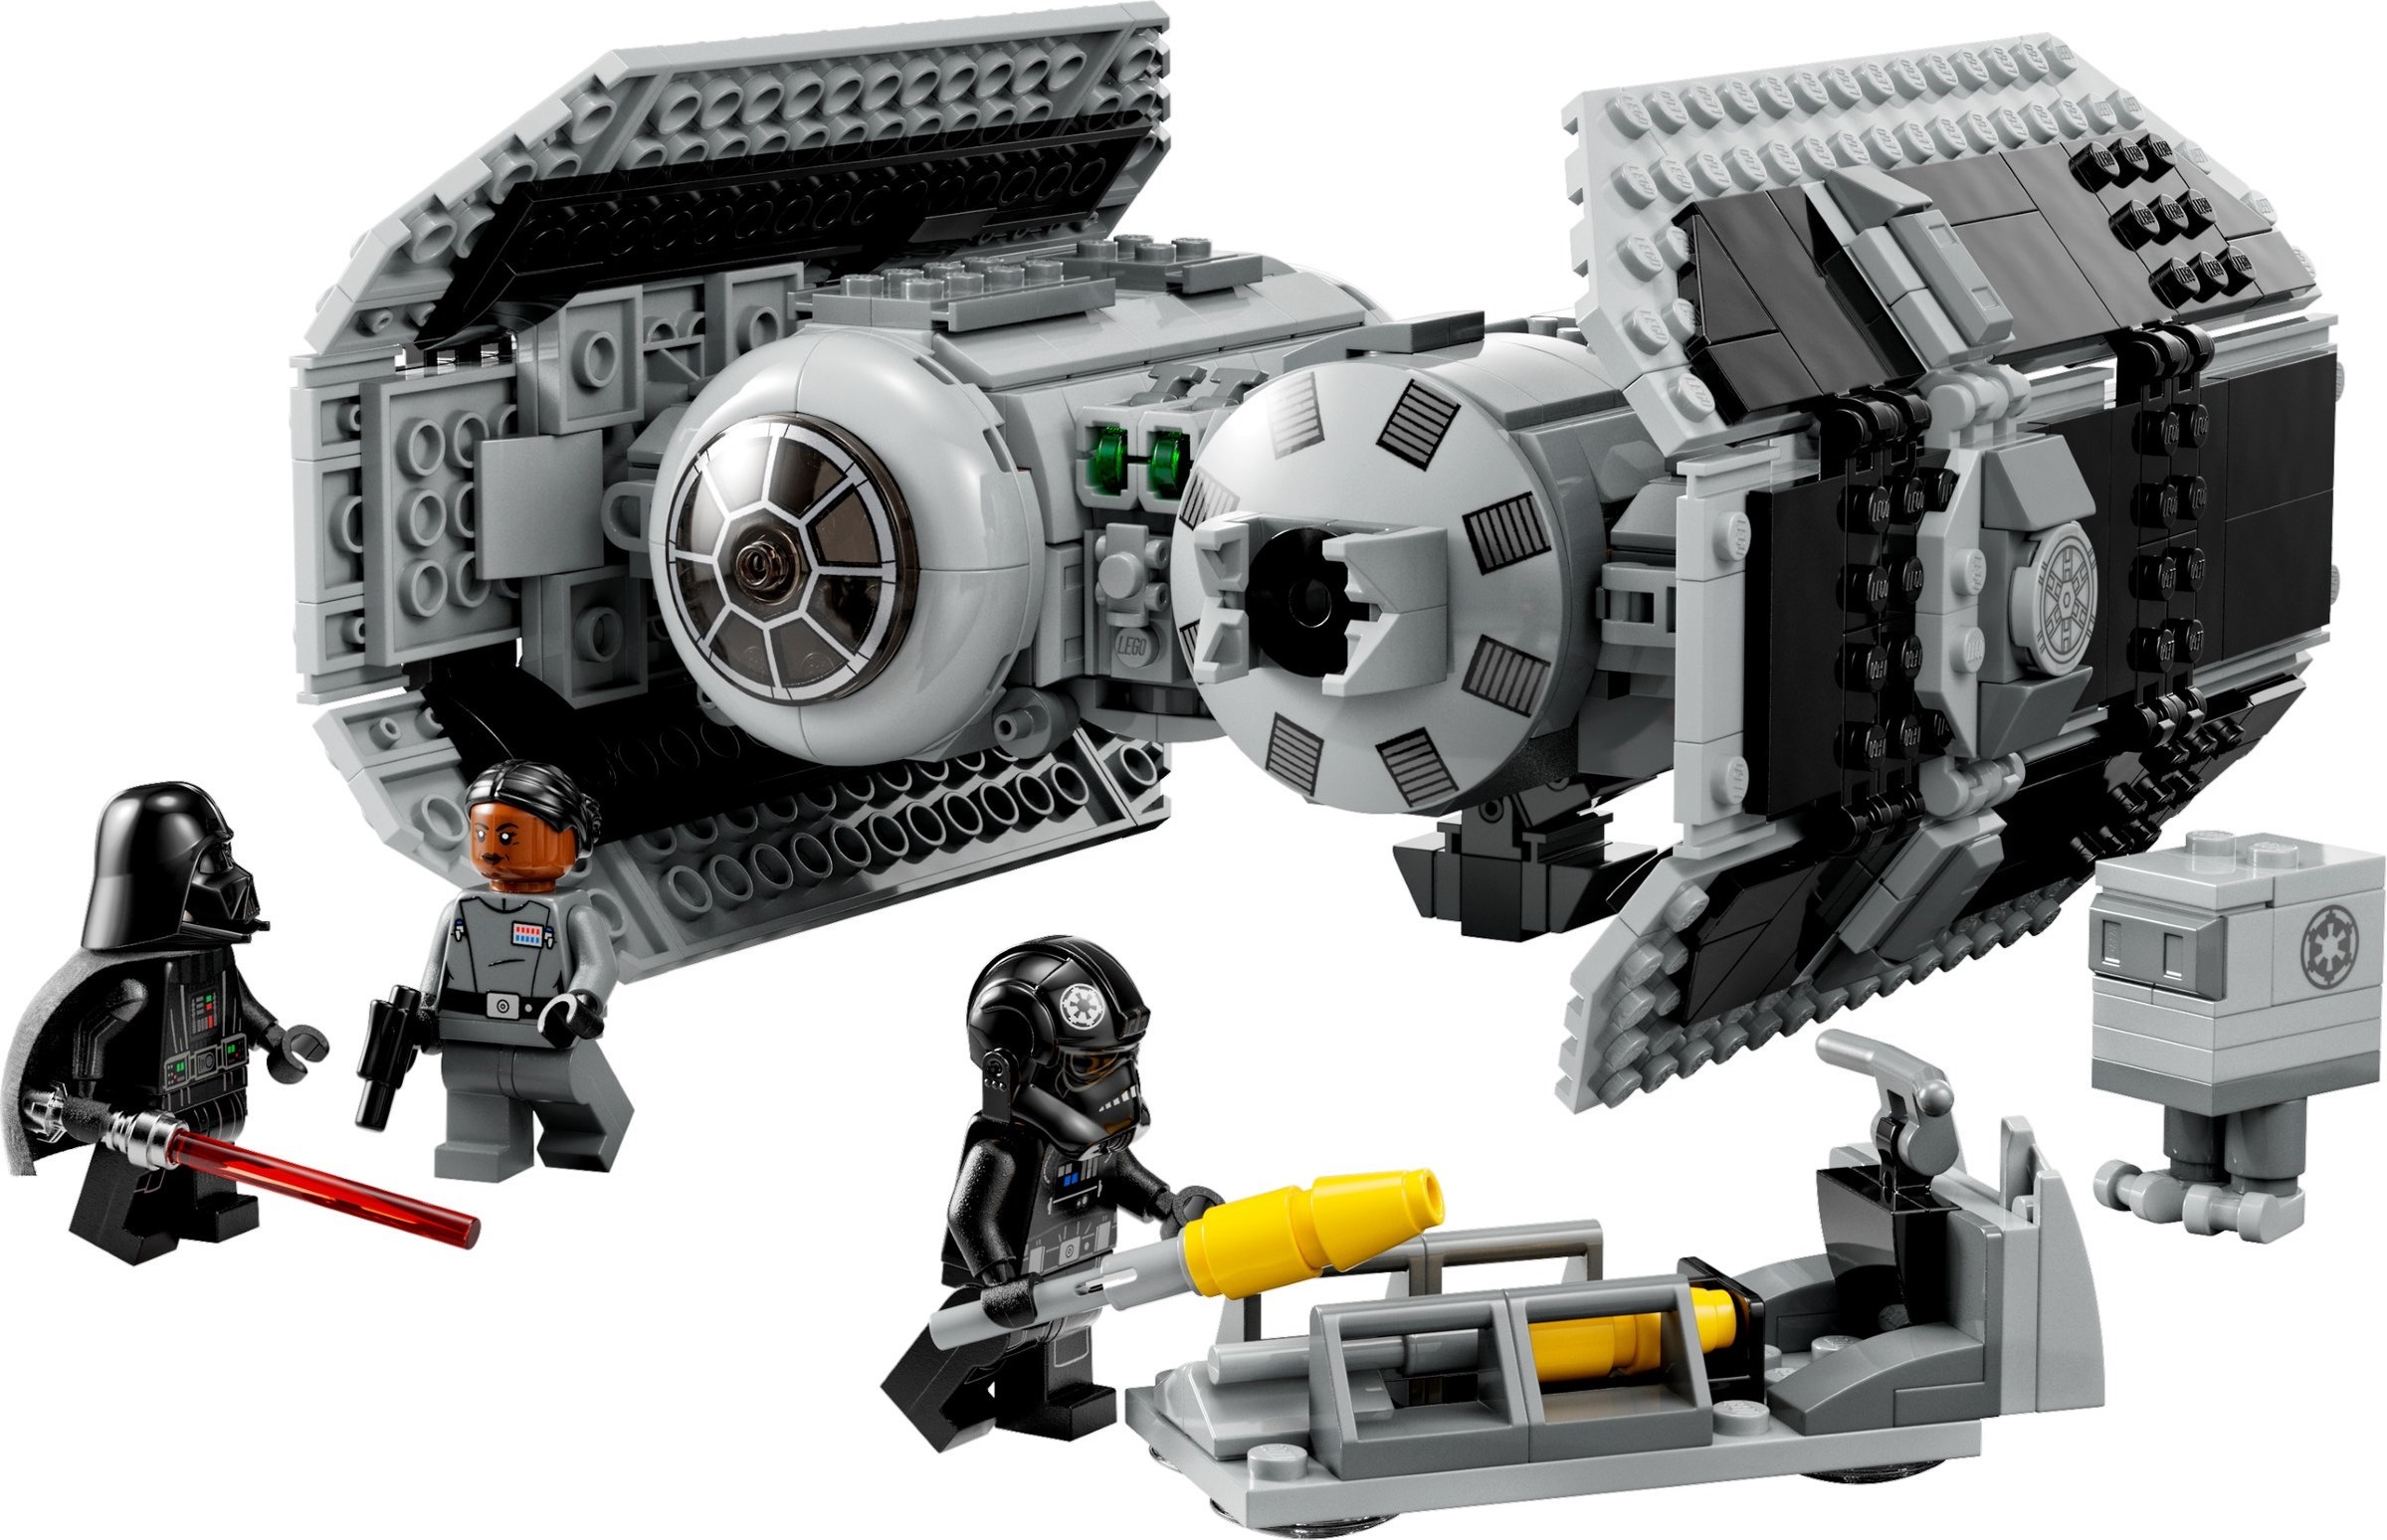 ▻ New LEGO Gabby's Dollhouse 2023: official visuals are available - HOTH  BRICKS